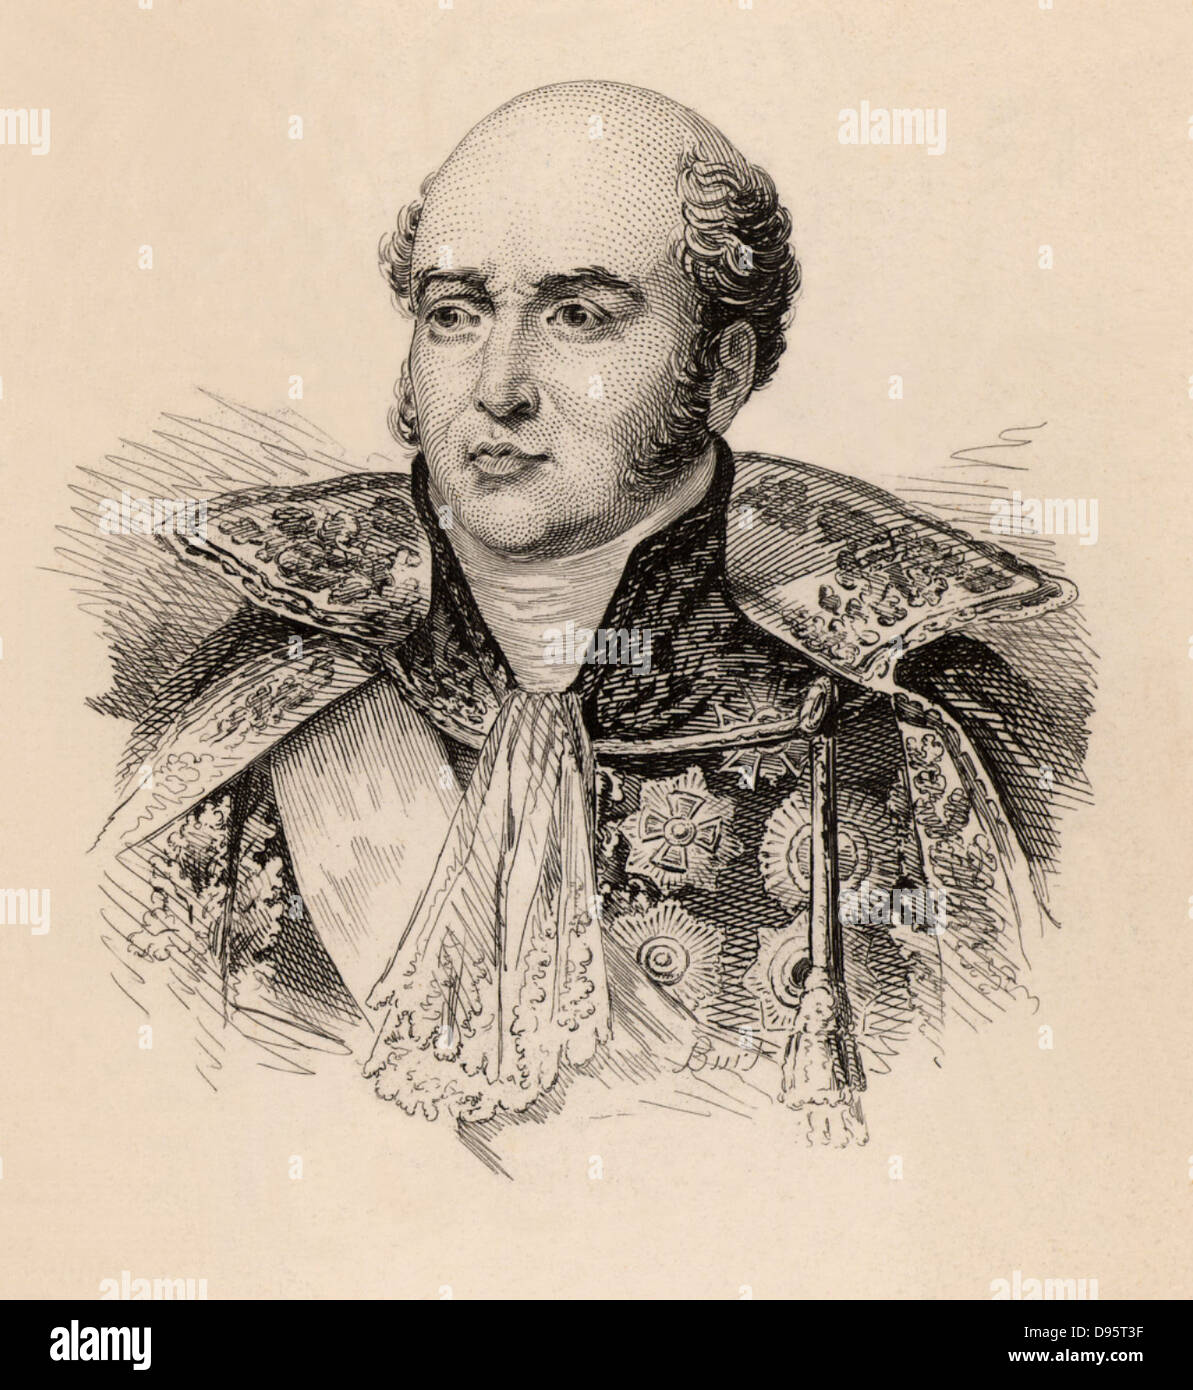 Louis Nicolas Davout or Davoust (1770-1823) Prince of Eckmul (1811) French soldier, educated at military academy with Napoleon Bonaparte; Marshal of France 1804. Served at Aboukir (1799) and through to the Russian campaign of 1812-1813. Engraving. Stock Photo